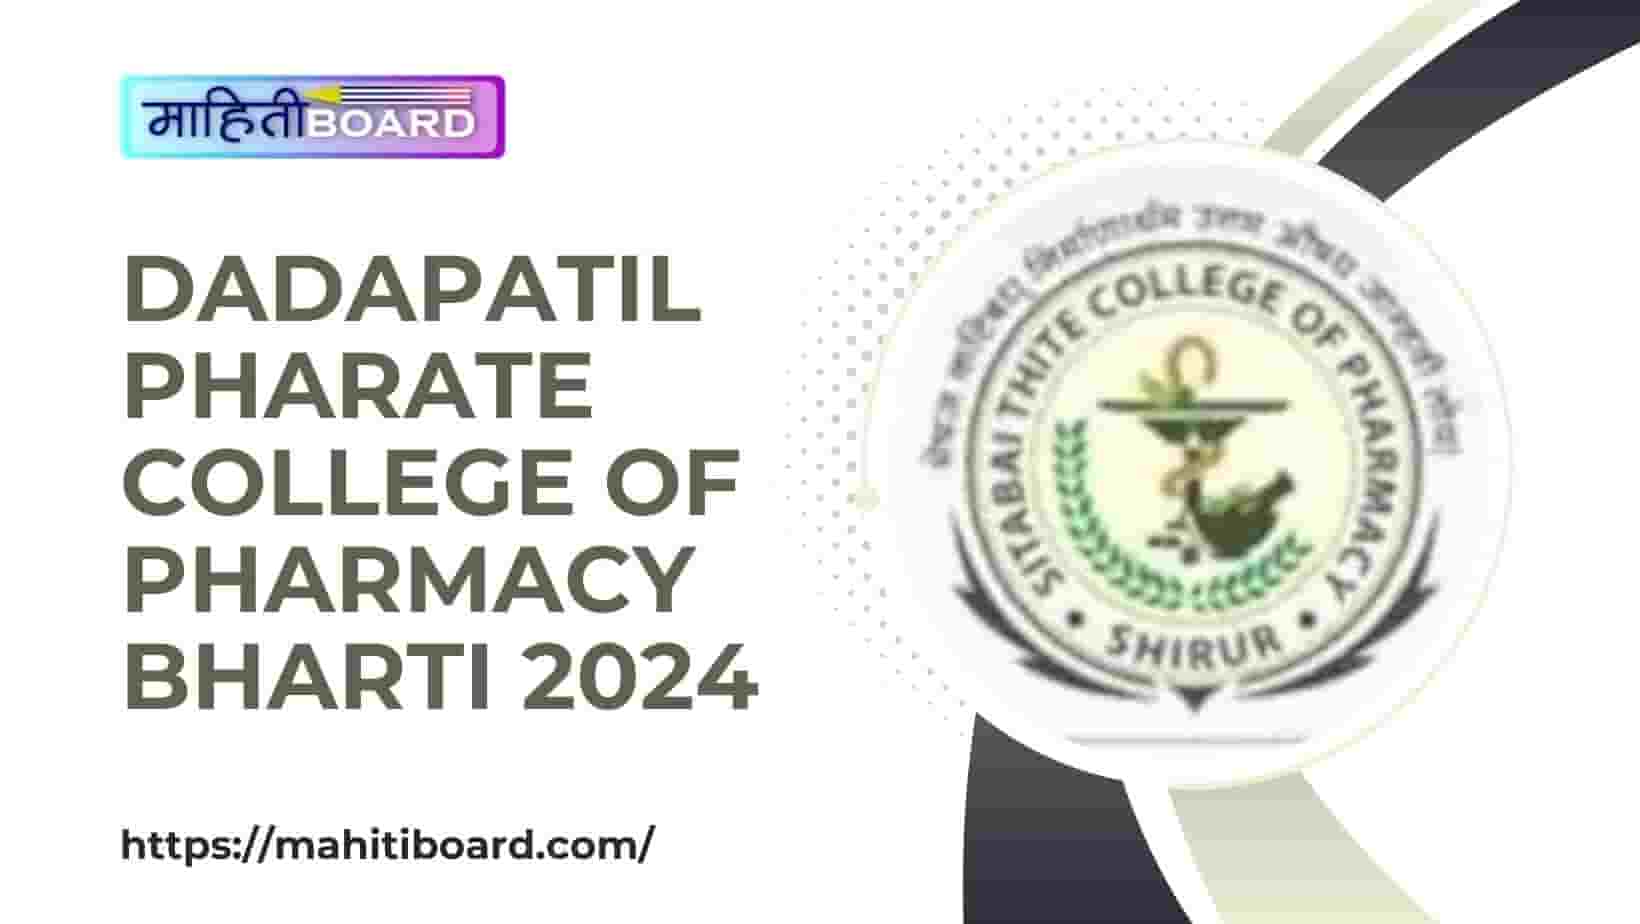 Dadapatil Pharate College of Pharmacy Bharti 2024